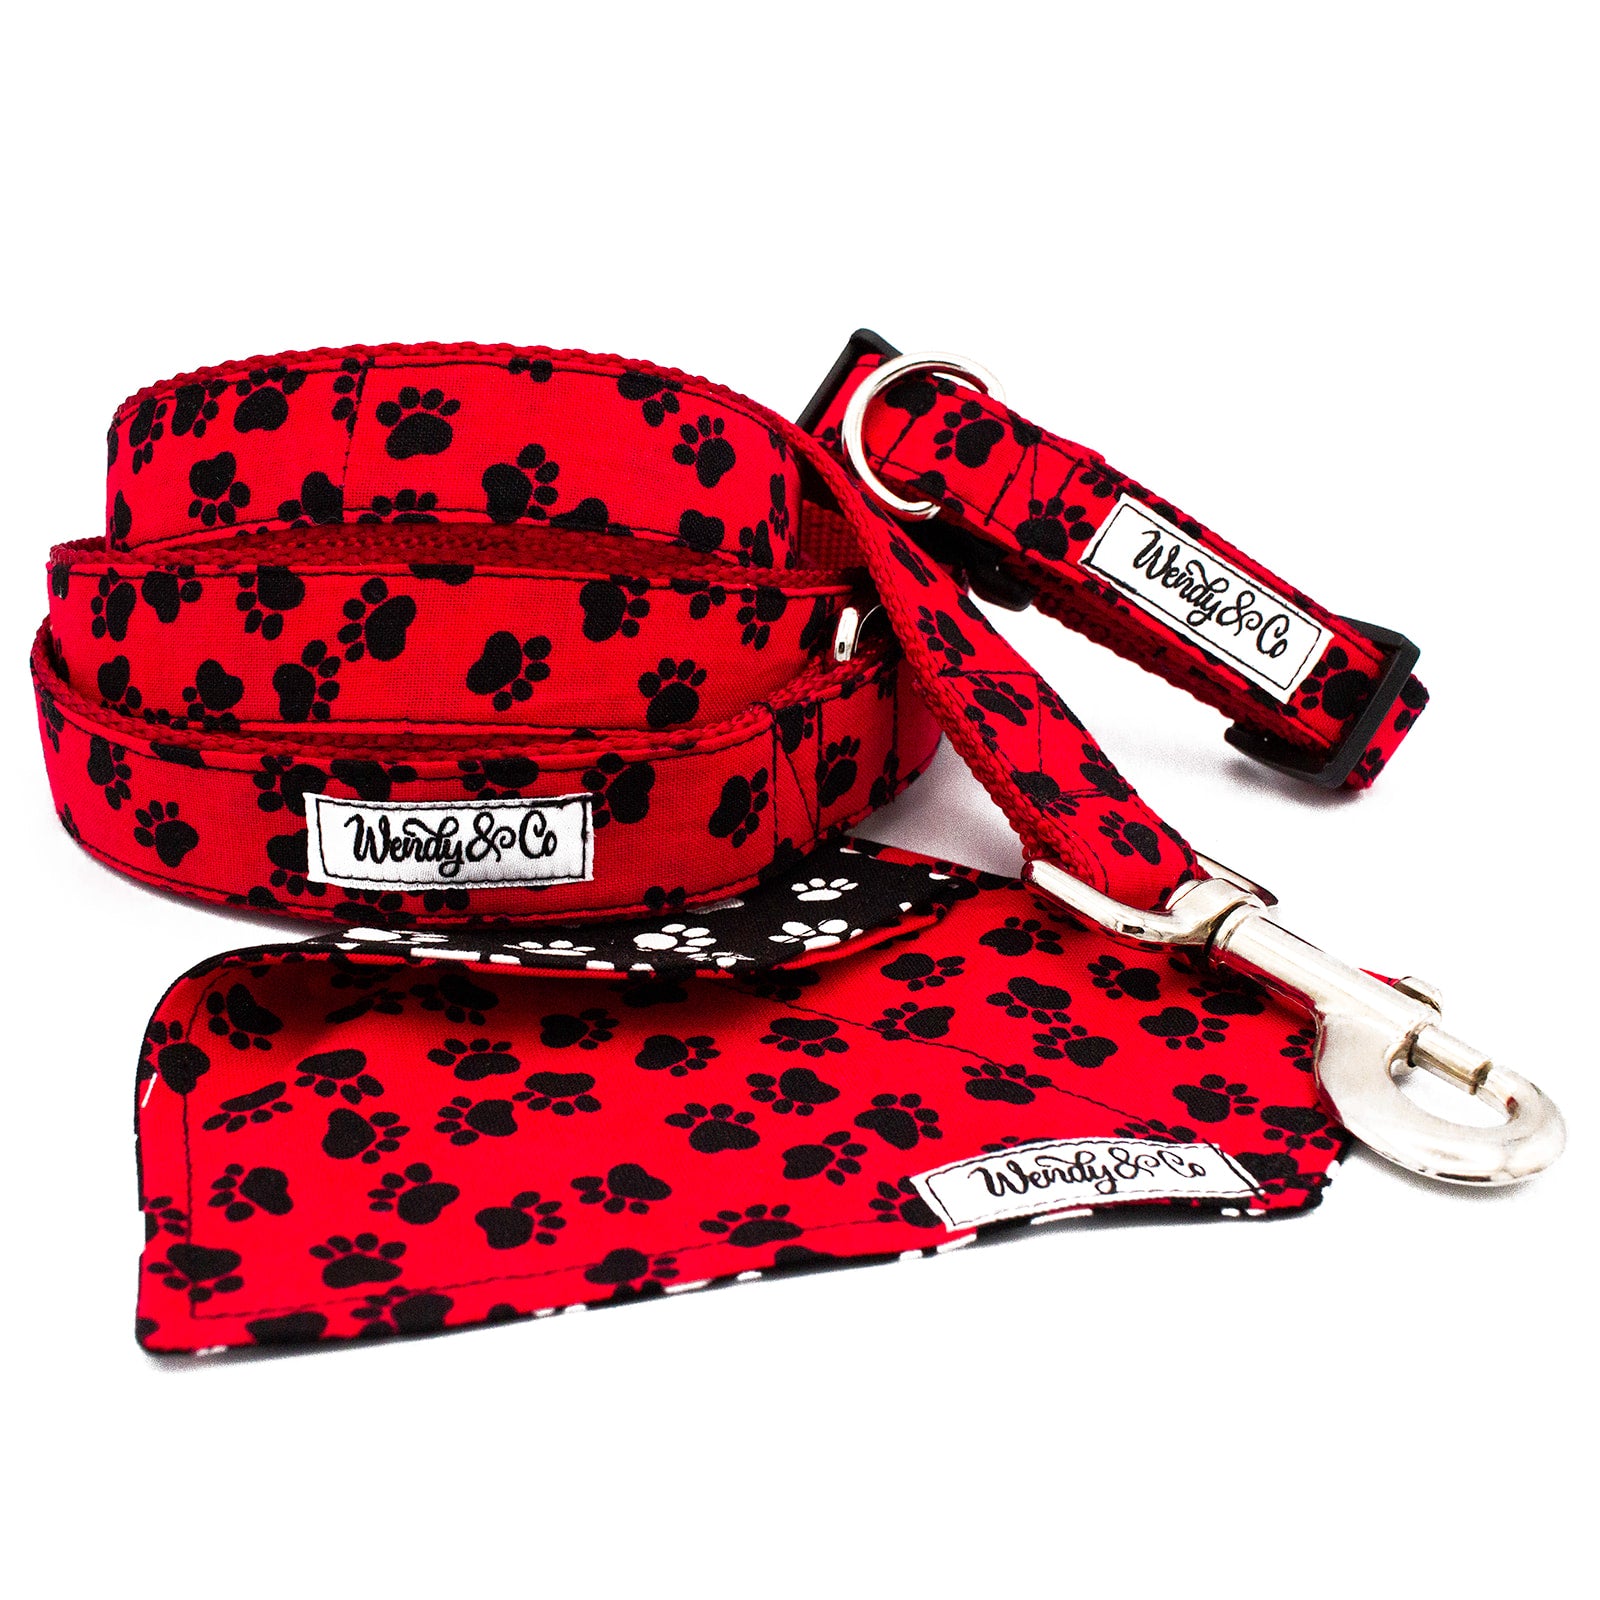 Dog leash, collar and bandana in bright red with black paws.